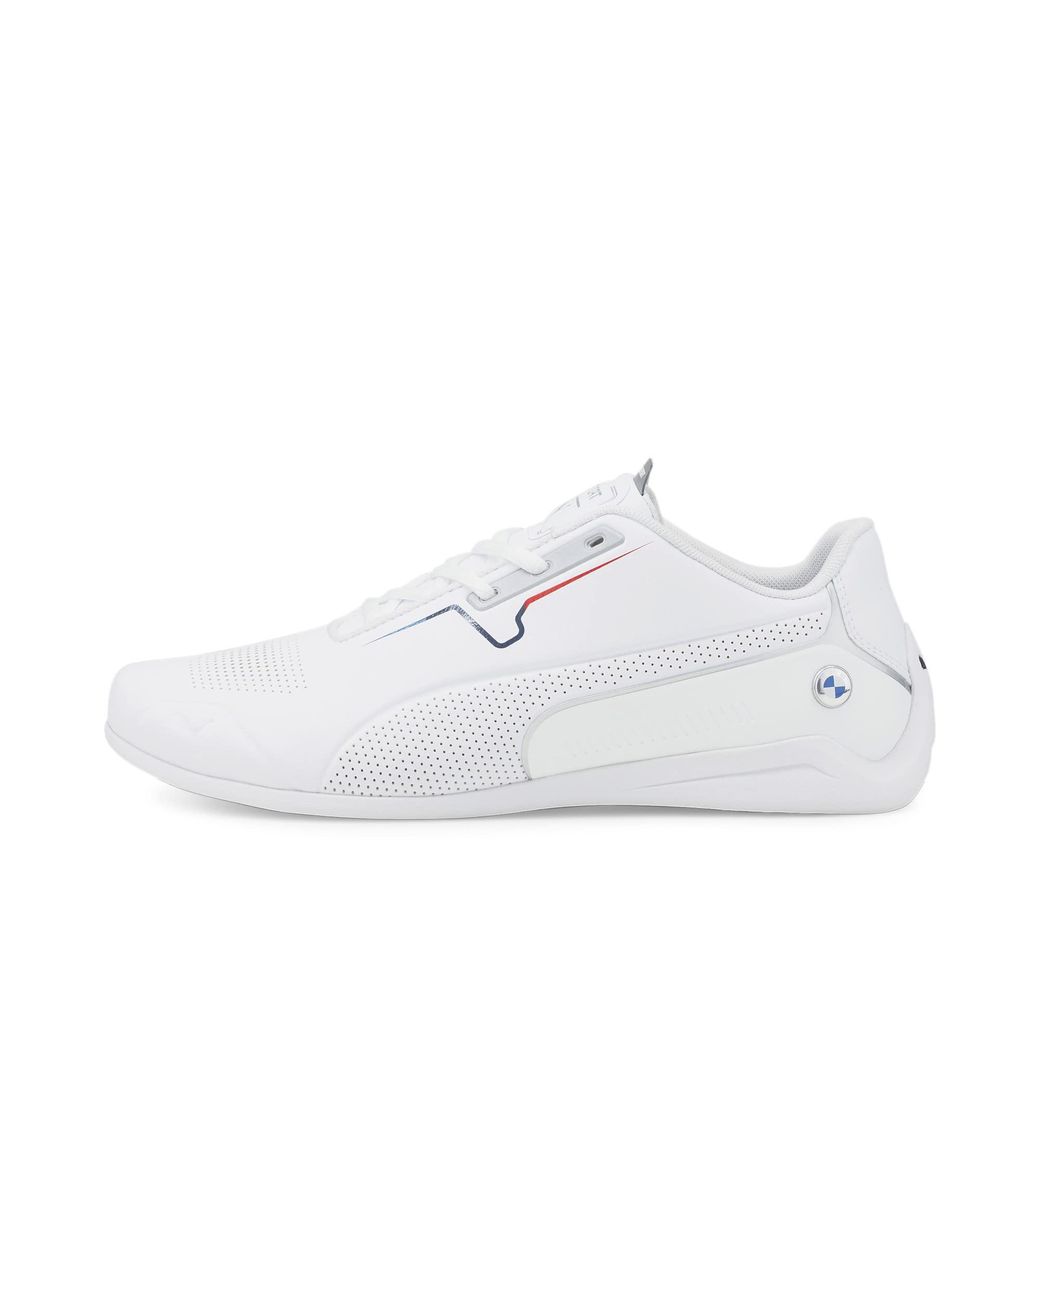 PUMA Synthetic Bmw M Motorsport Drift Cat 8 Sneaker in White- White (White)  for Men - Save 56% | Lyst